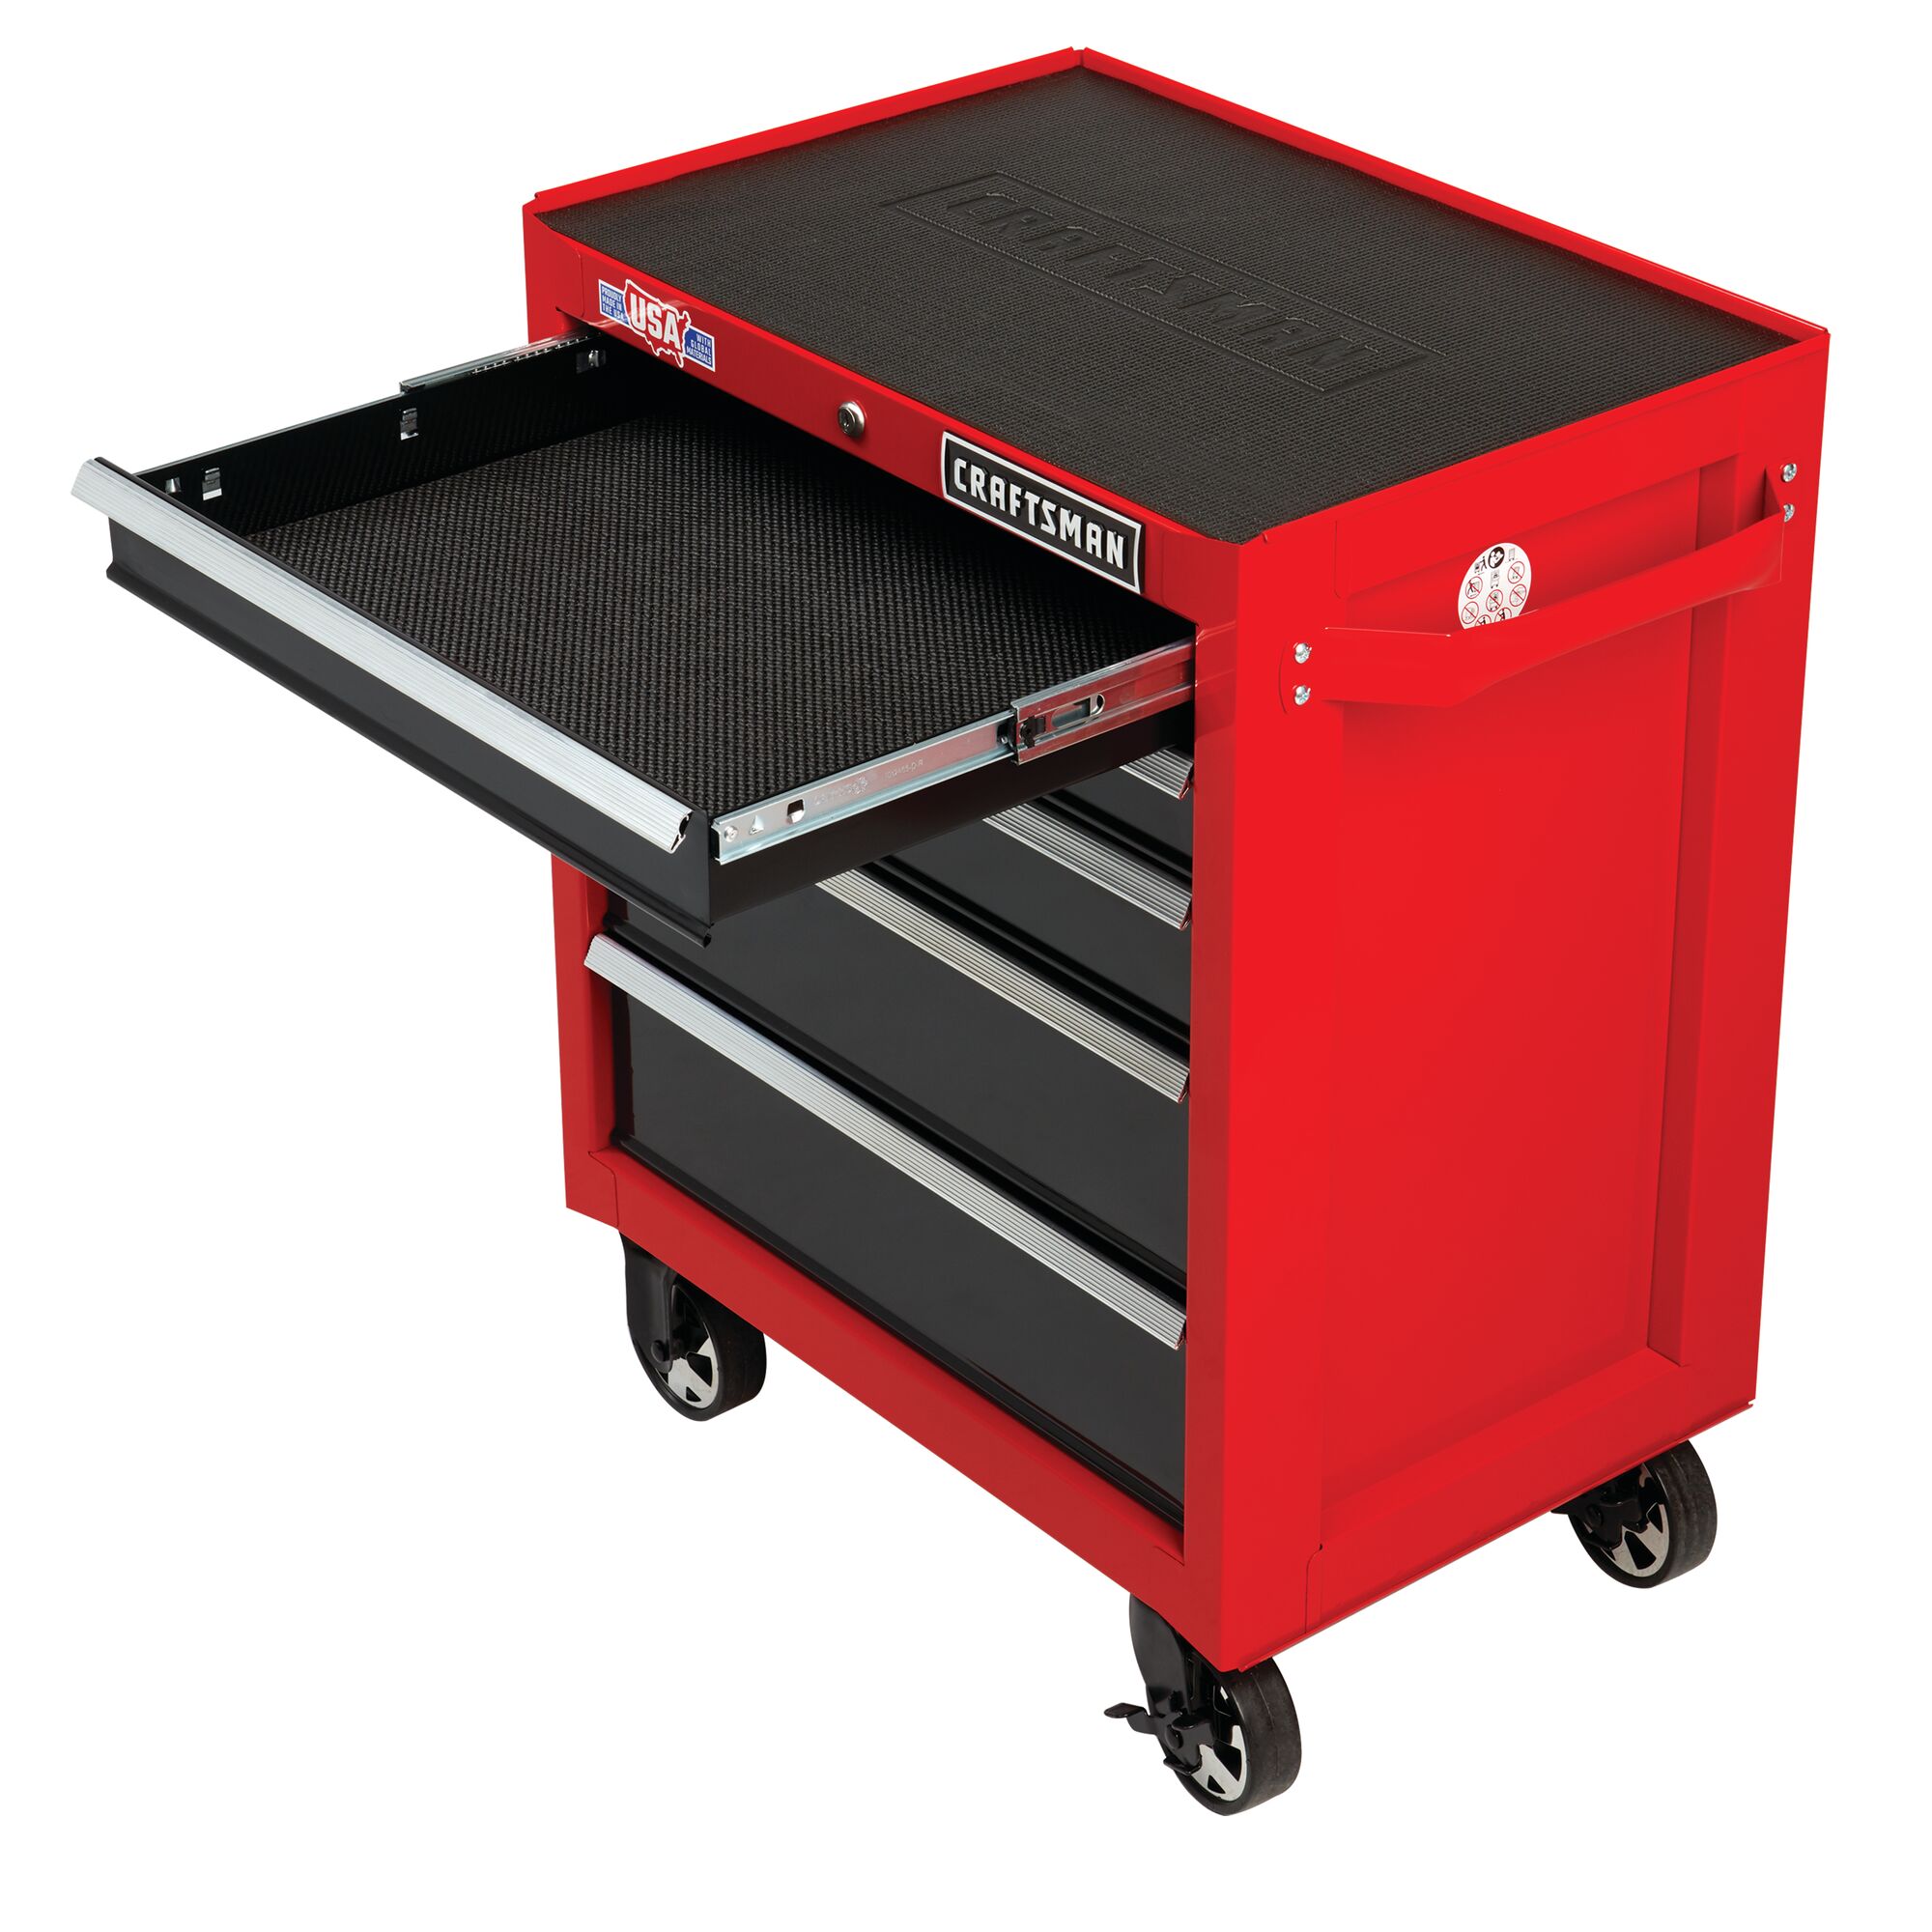 View of CRAFTSMAN Accessories: Metal Storage highlighting product features